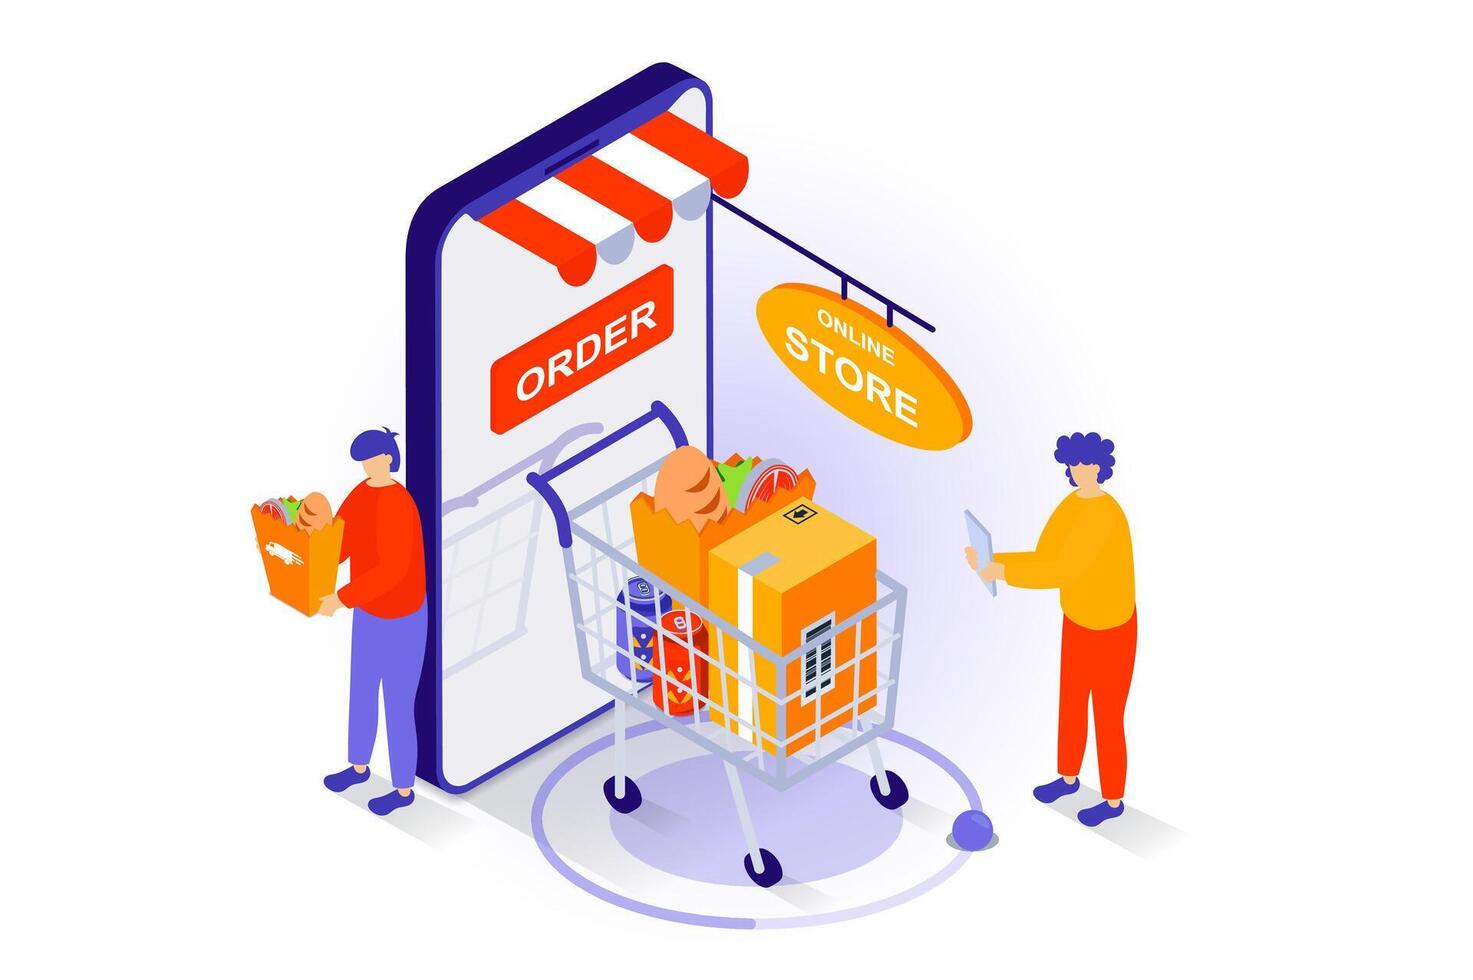 Online shopping concept in 3d isometric design. People ordering food in supermarket cart and delivery to home using mobile phone application. Vector illustration with isometry scene for web graphic